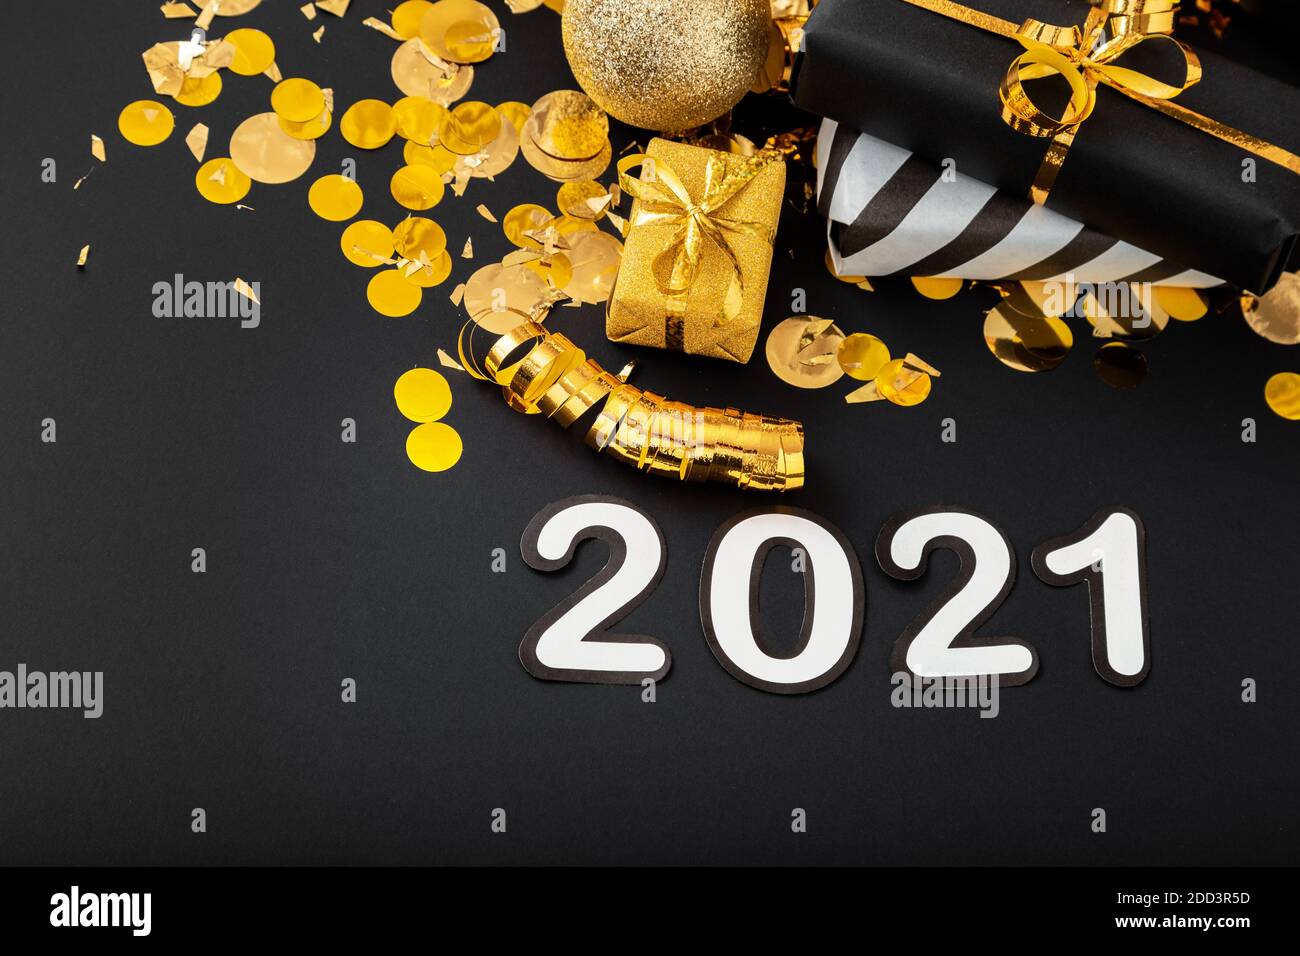 2021 white text lettering on black background with golden confetti, Christmas gift boxes gold balls festive decor. Happy New year event composition. Stock Photo